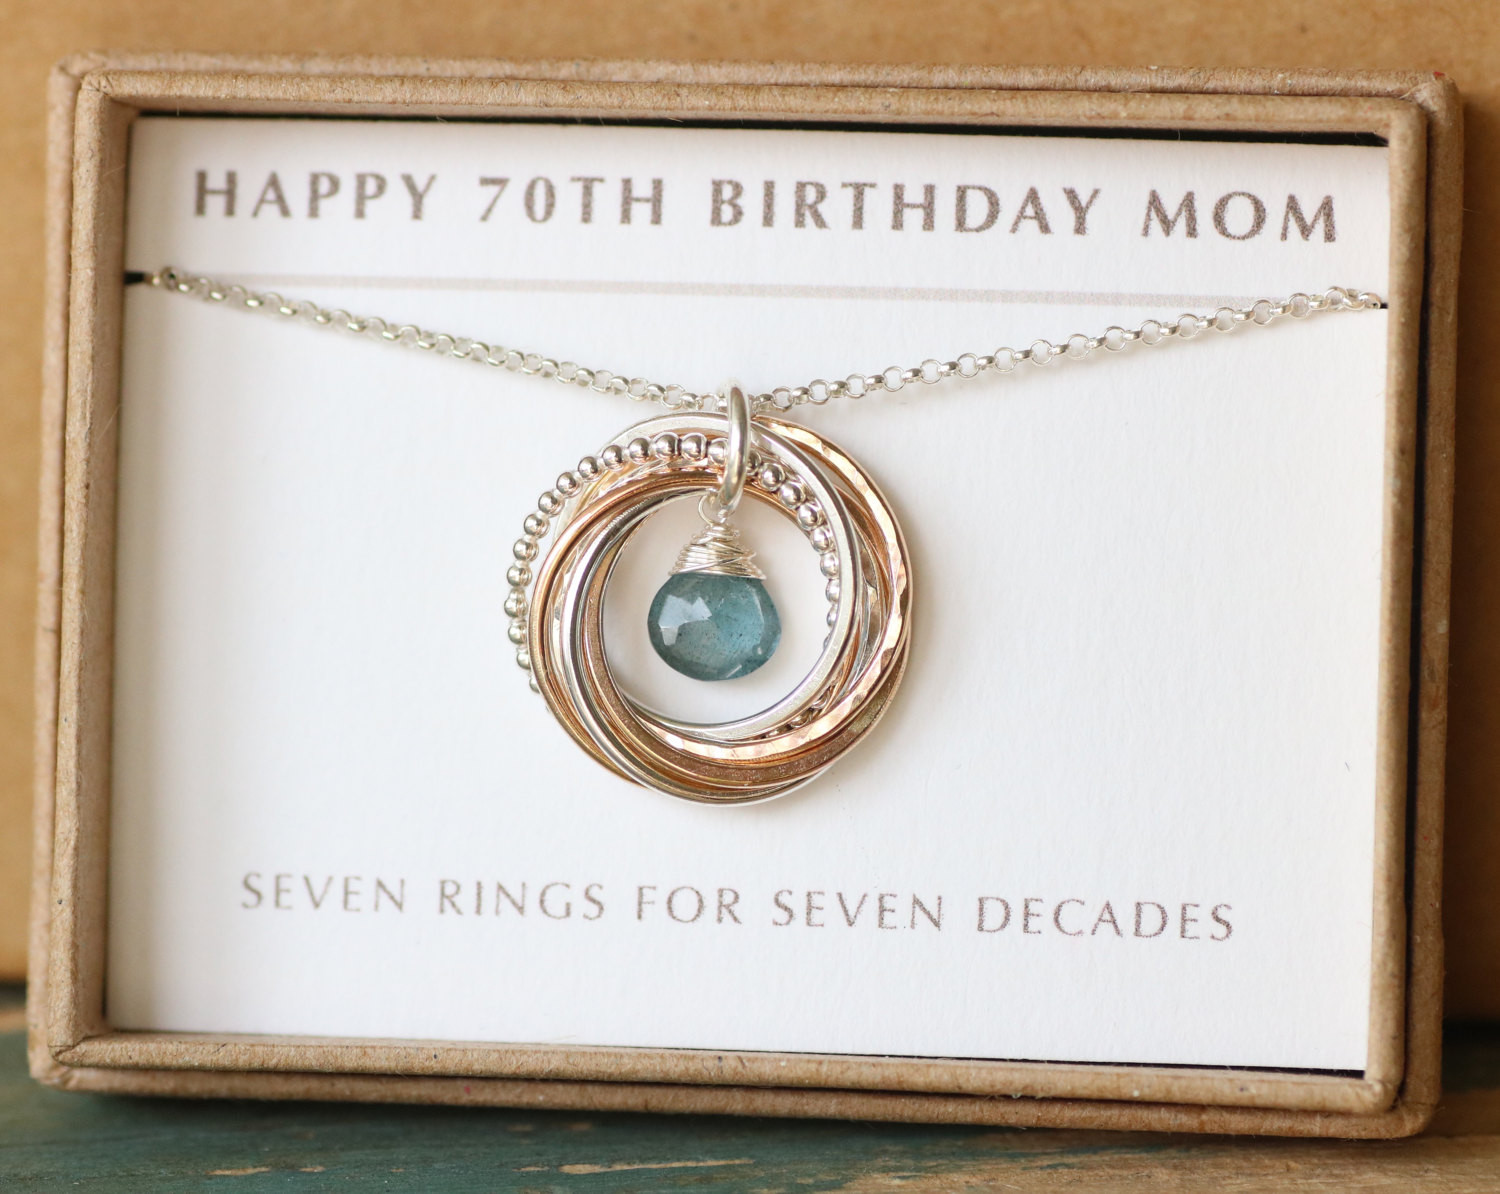 70th Birthday Party Ideas For Mom
 70th birthday t for mom aquamarine necklace March